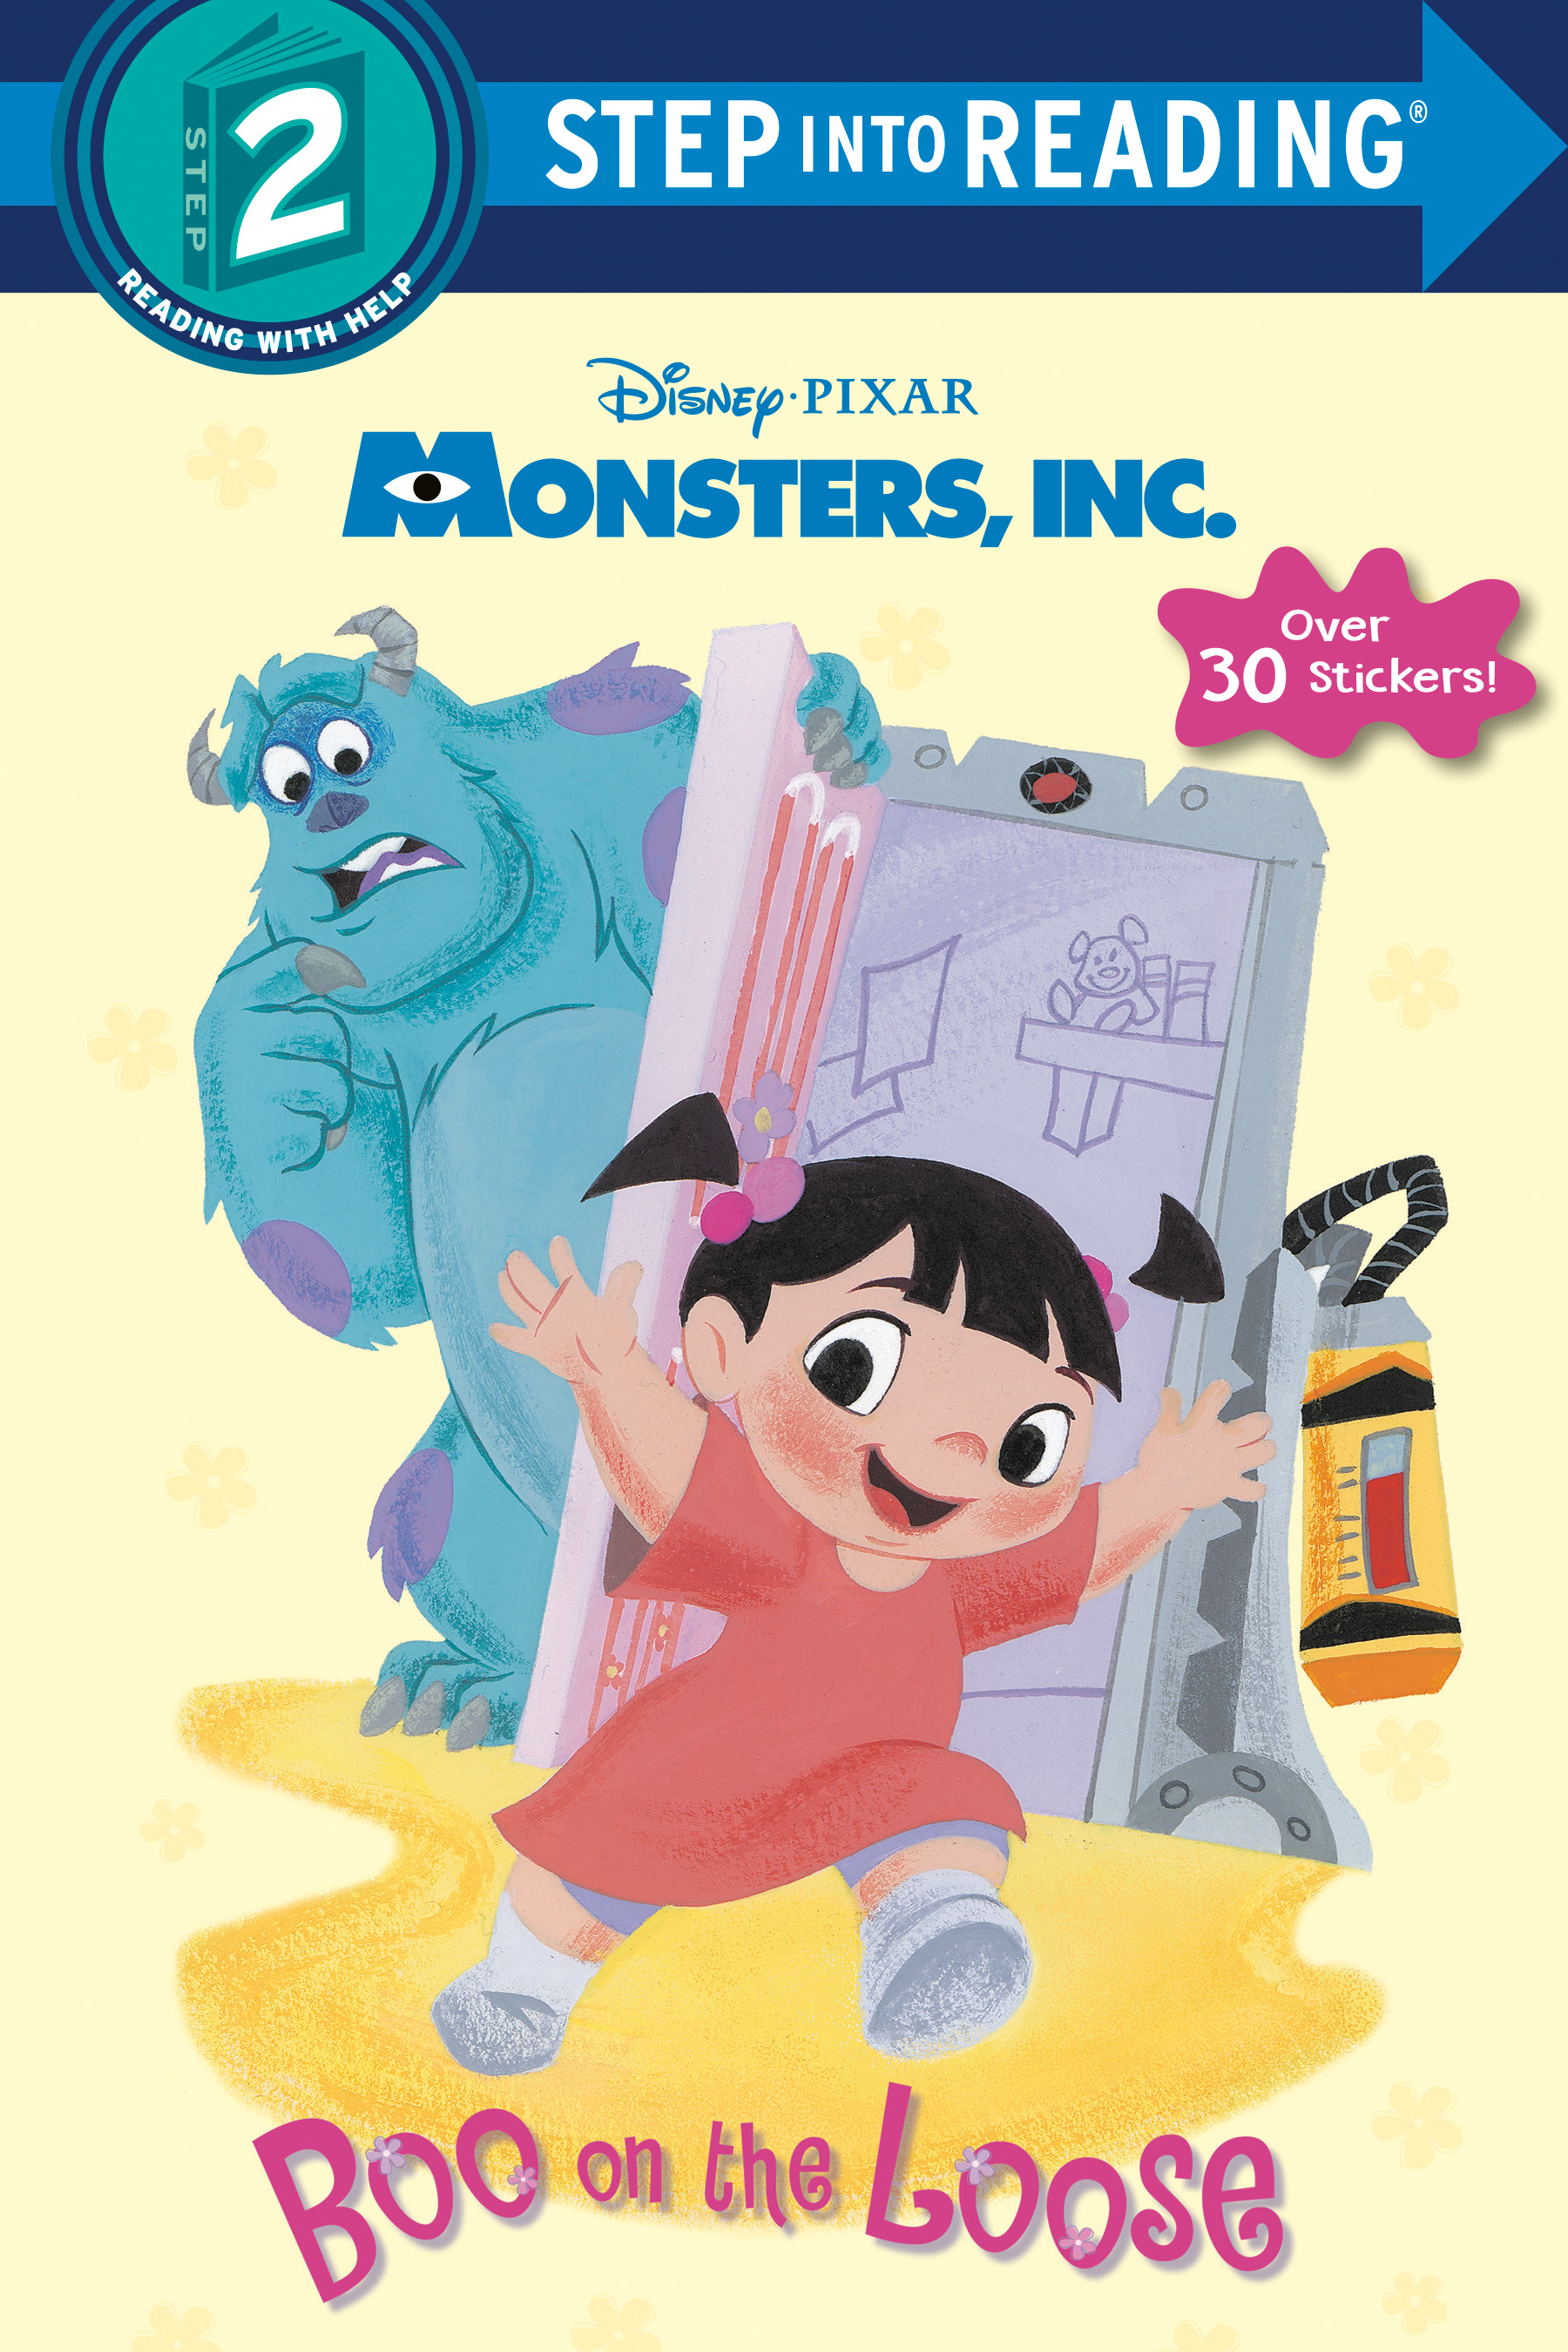 Step Into Reading - Boo on the Loose (Disney/Pixar Monsters, Inc.) | First reader